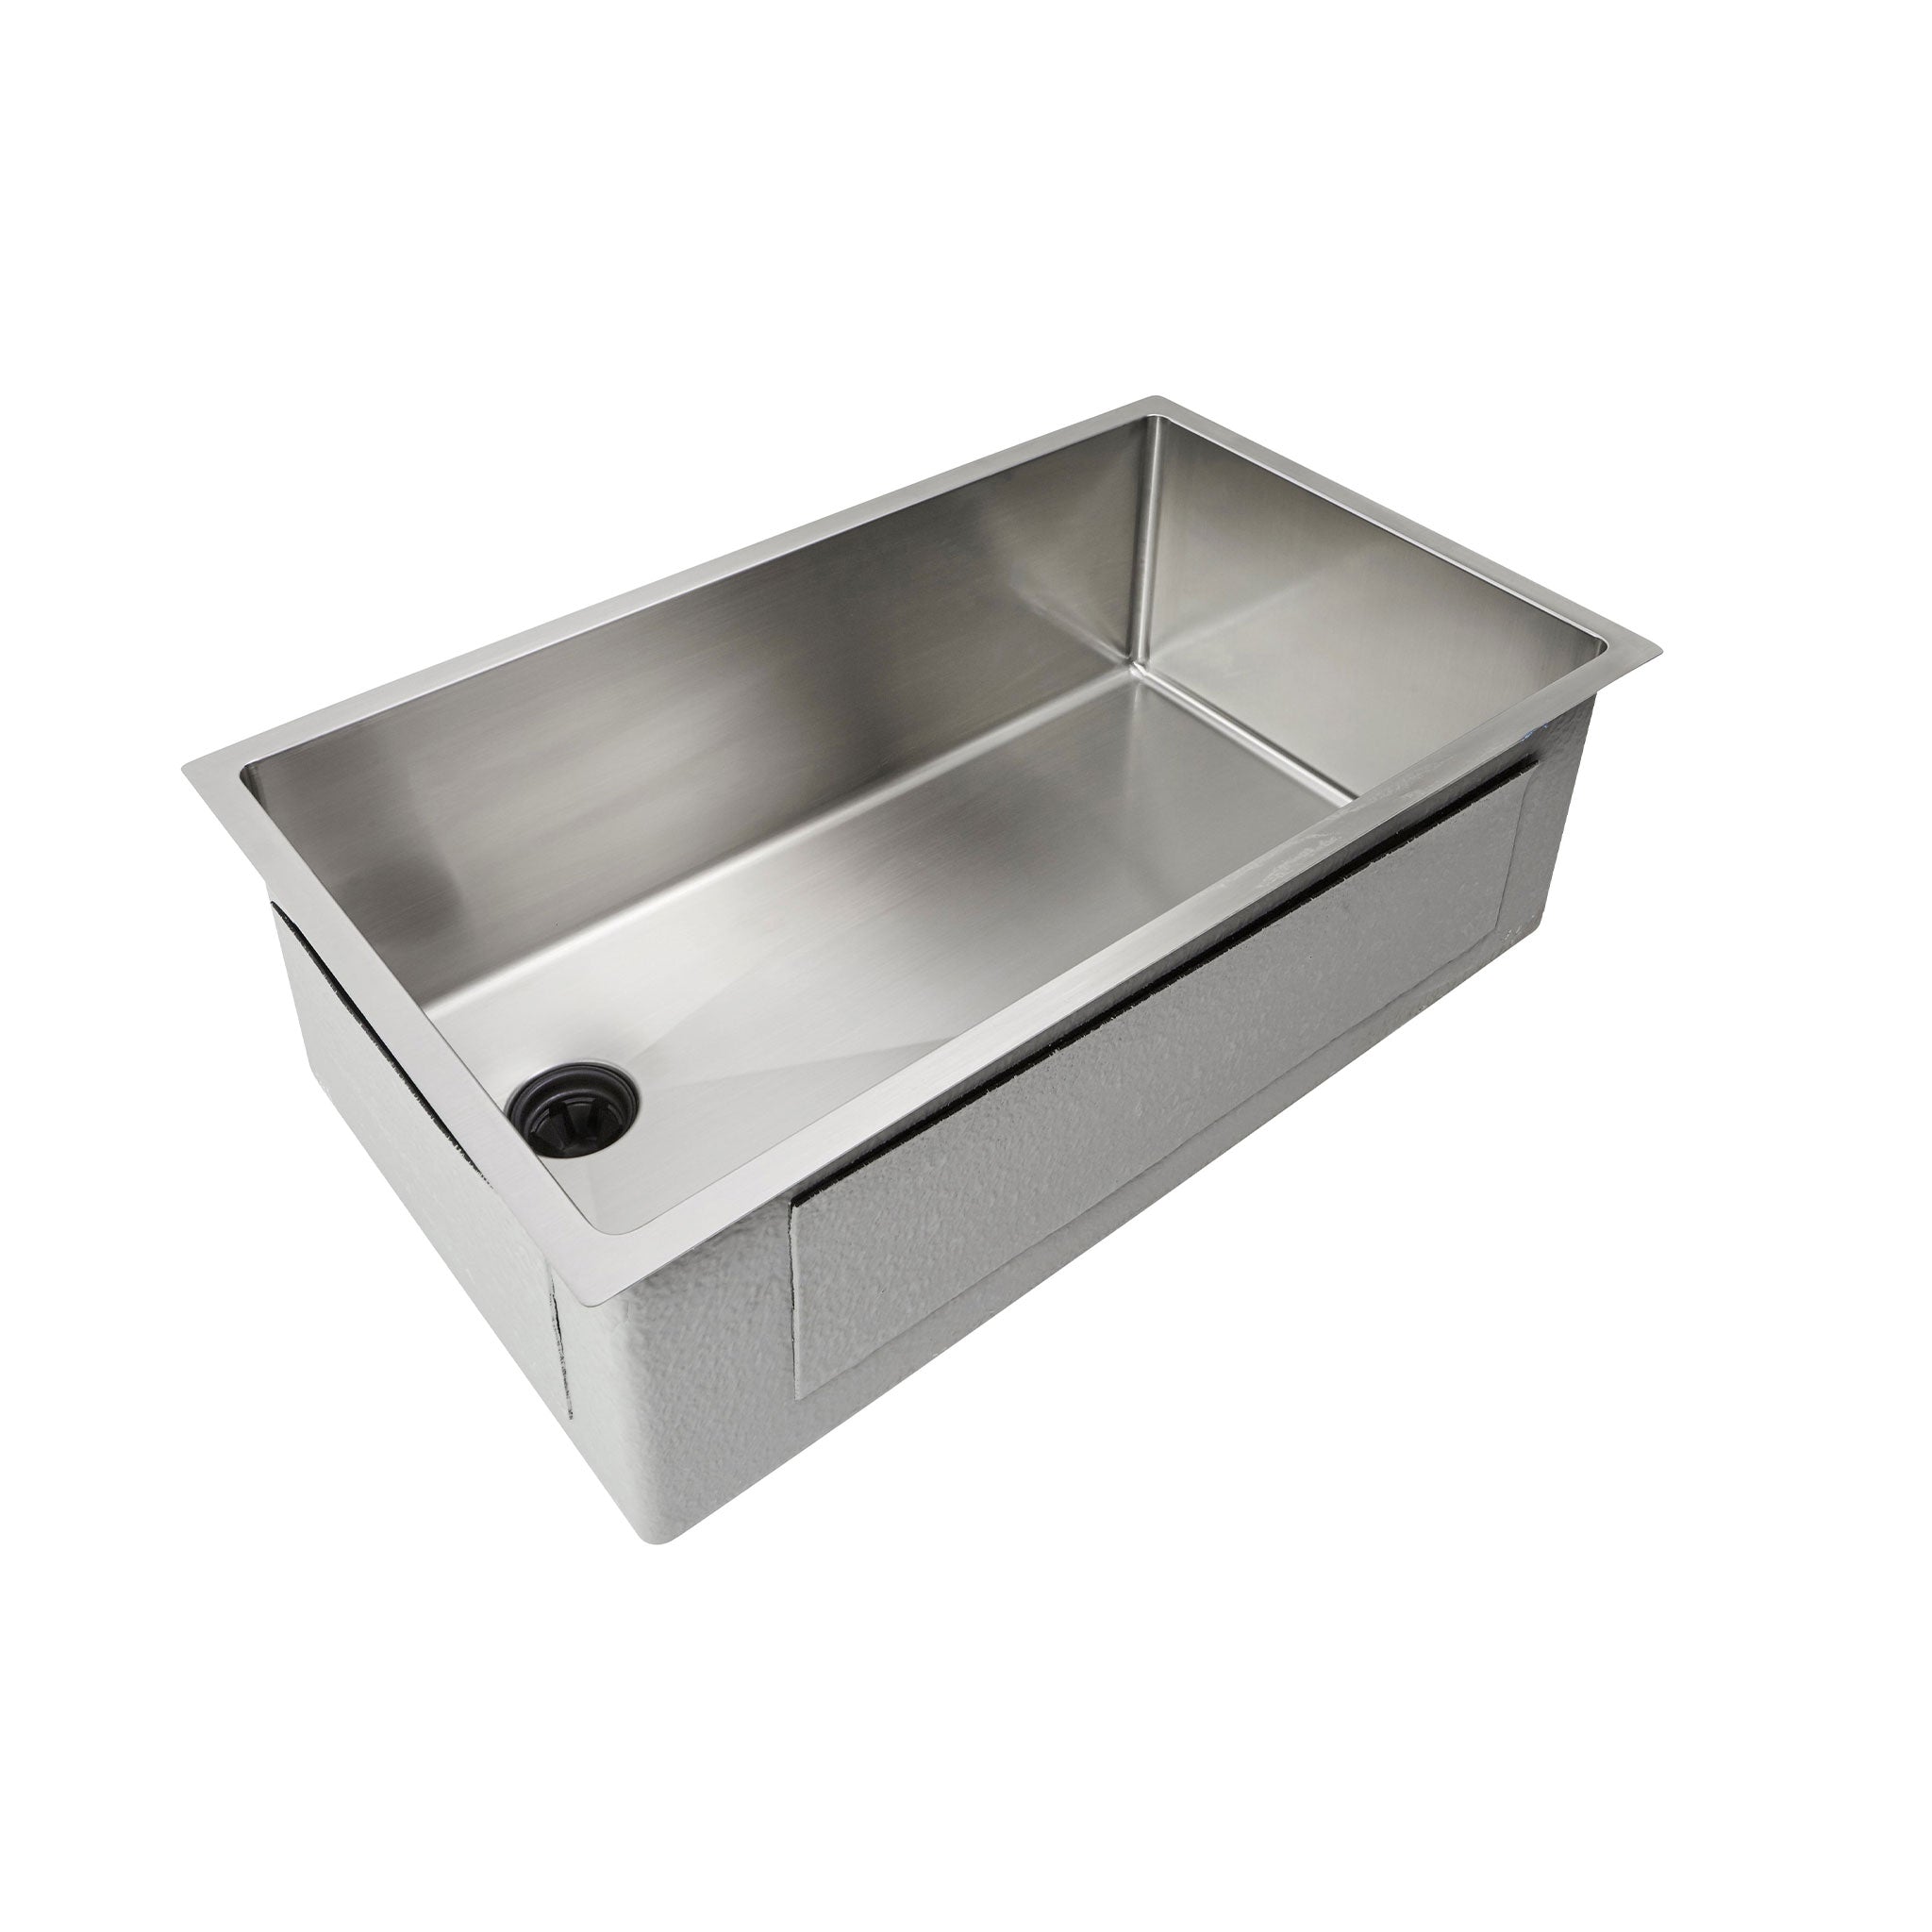 30 inch, classic-style 16 gauge stainless steel, single basin undermount kitchen sink with an offset seamless drain on the left.